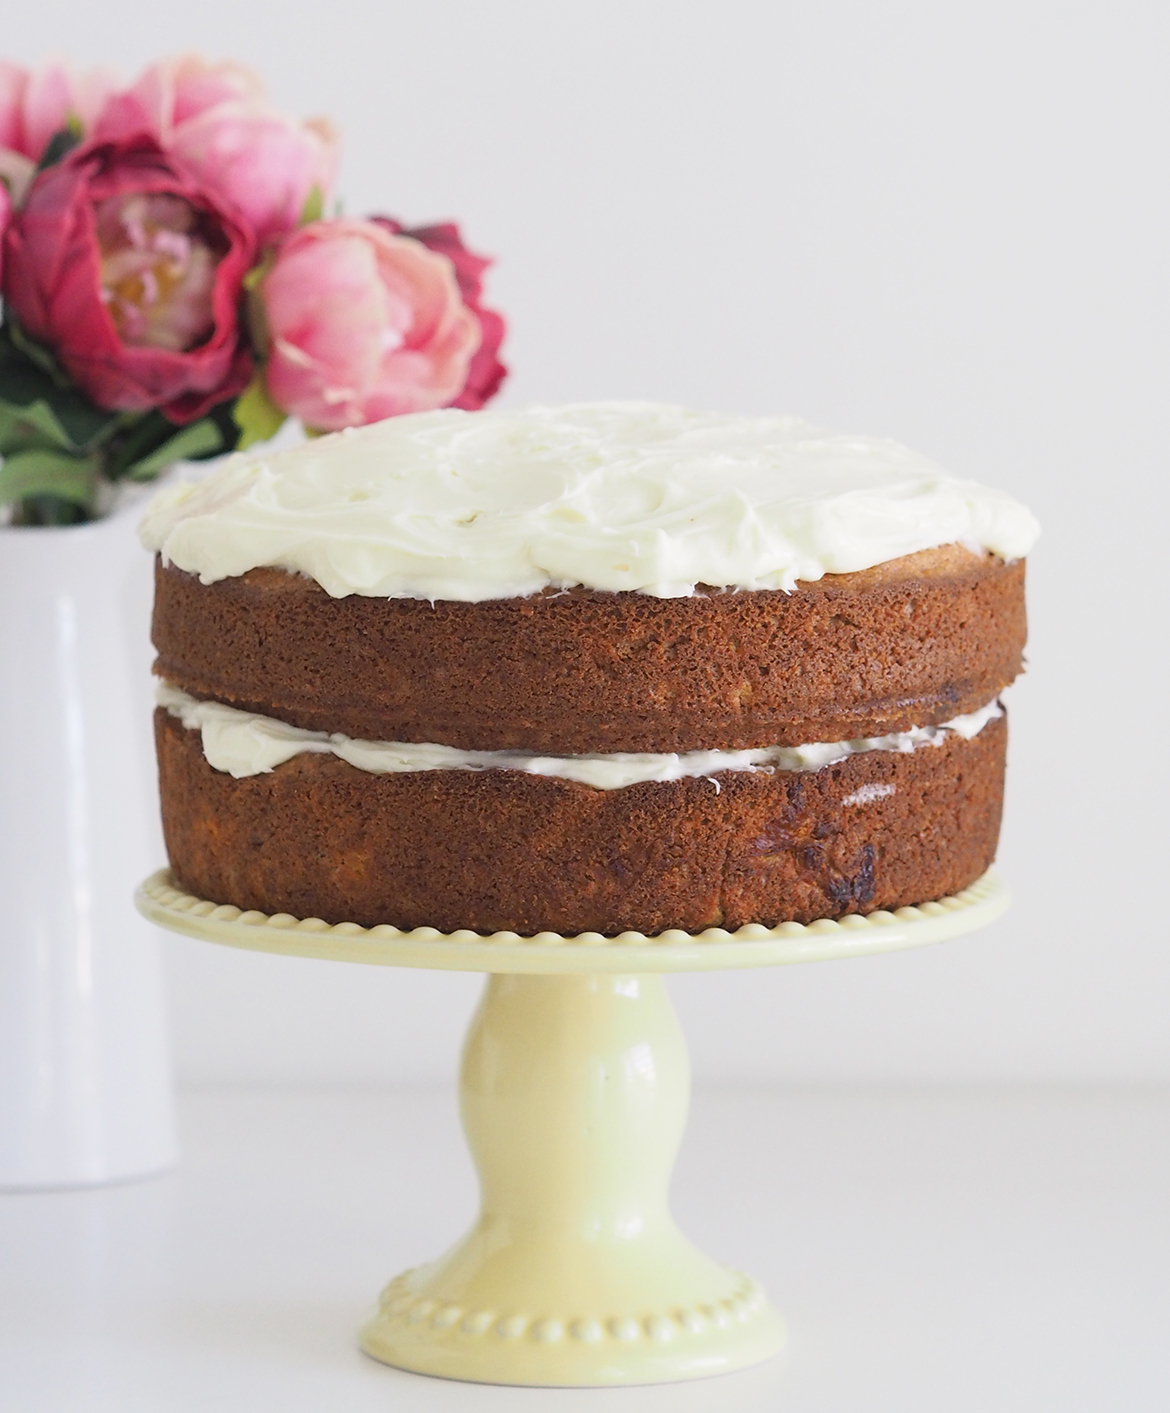 This delicious and fluffy cream cheese icing recipe will make your favourite carrot and banana cakes taste so good.